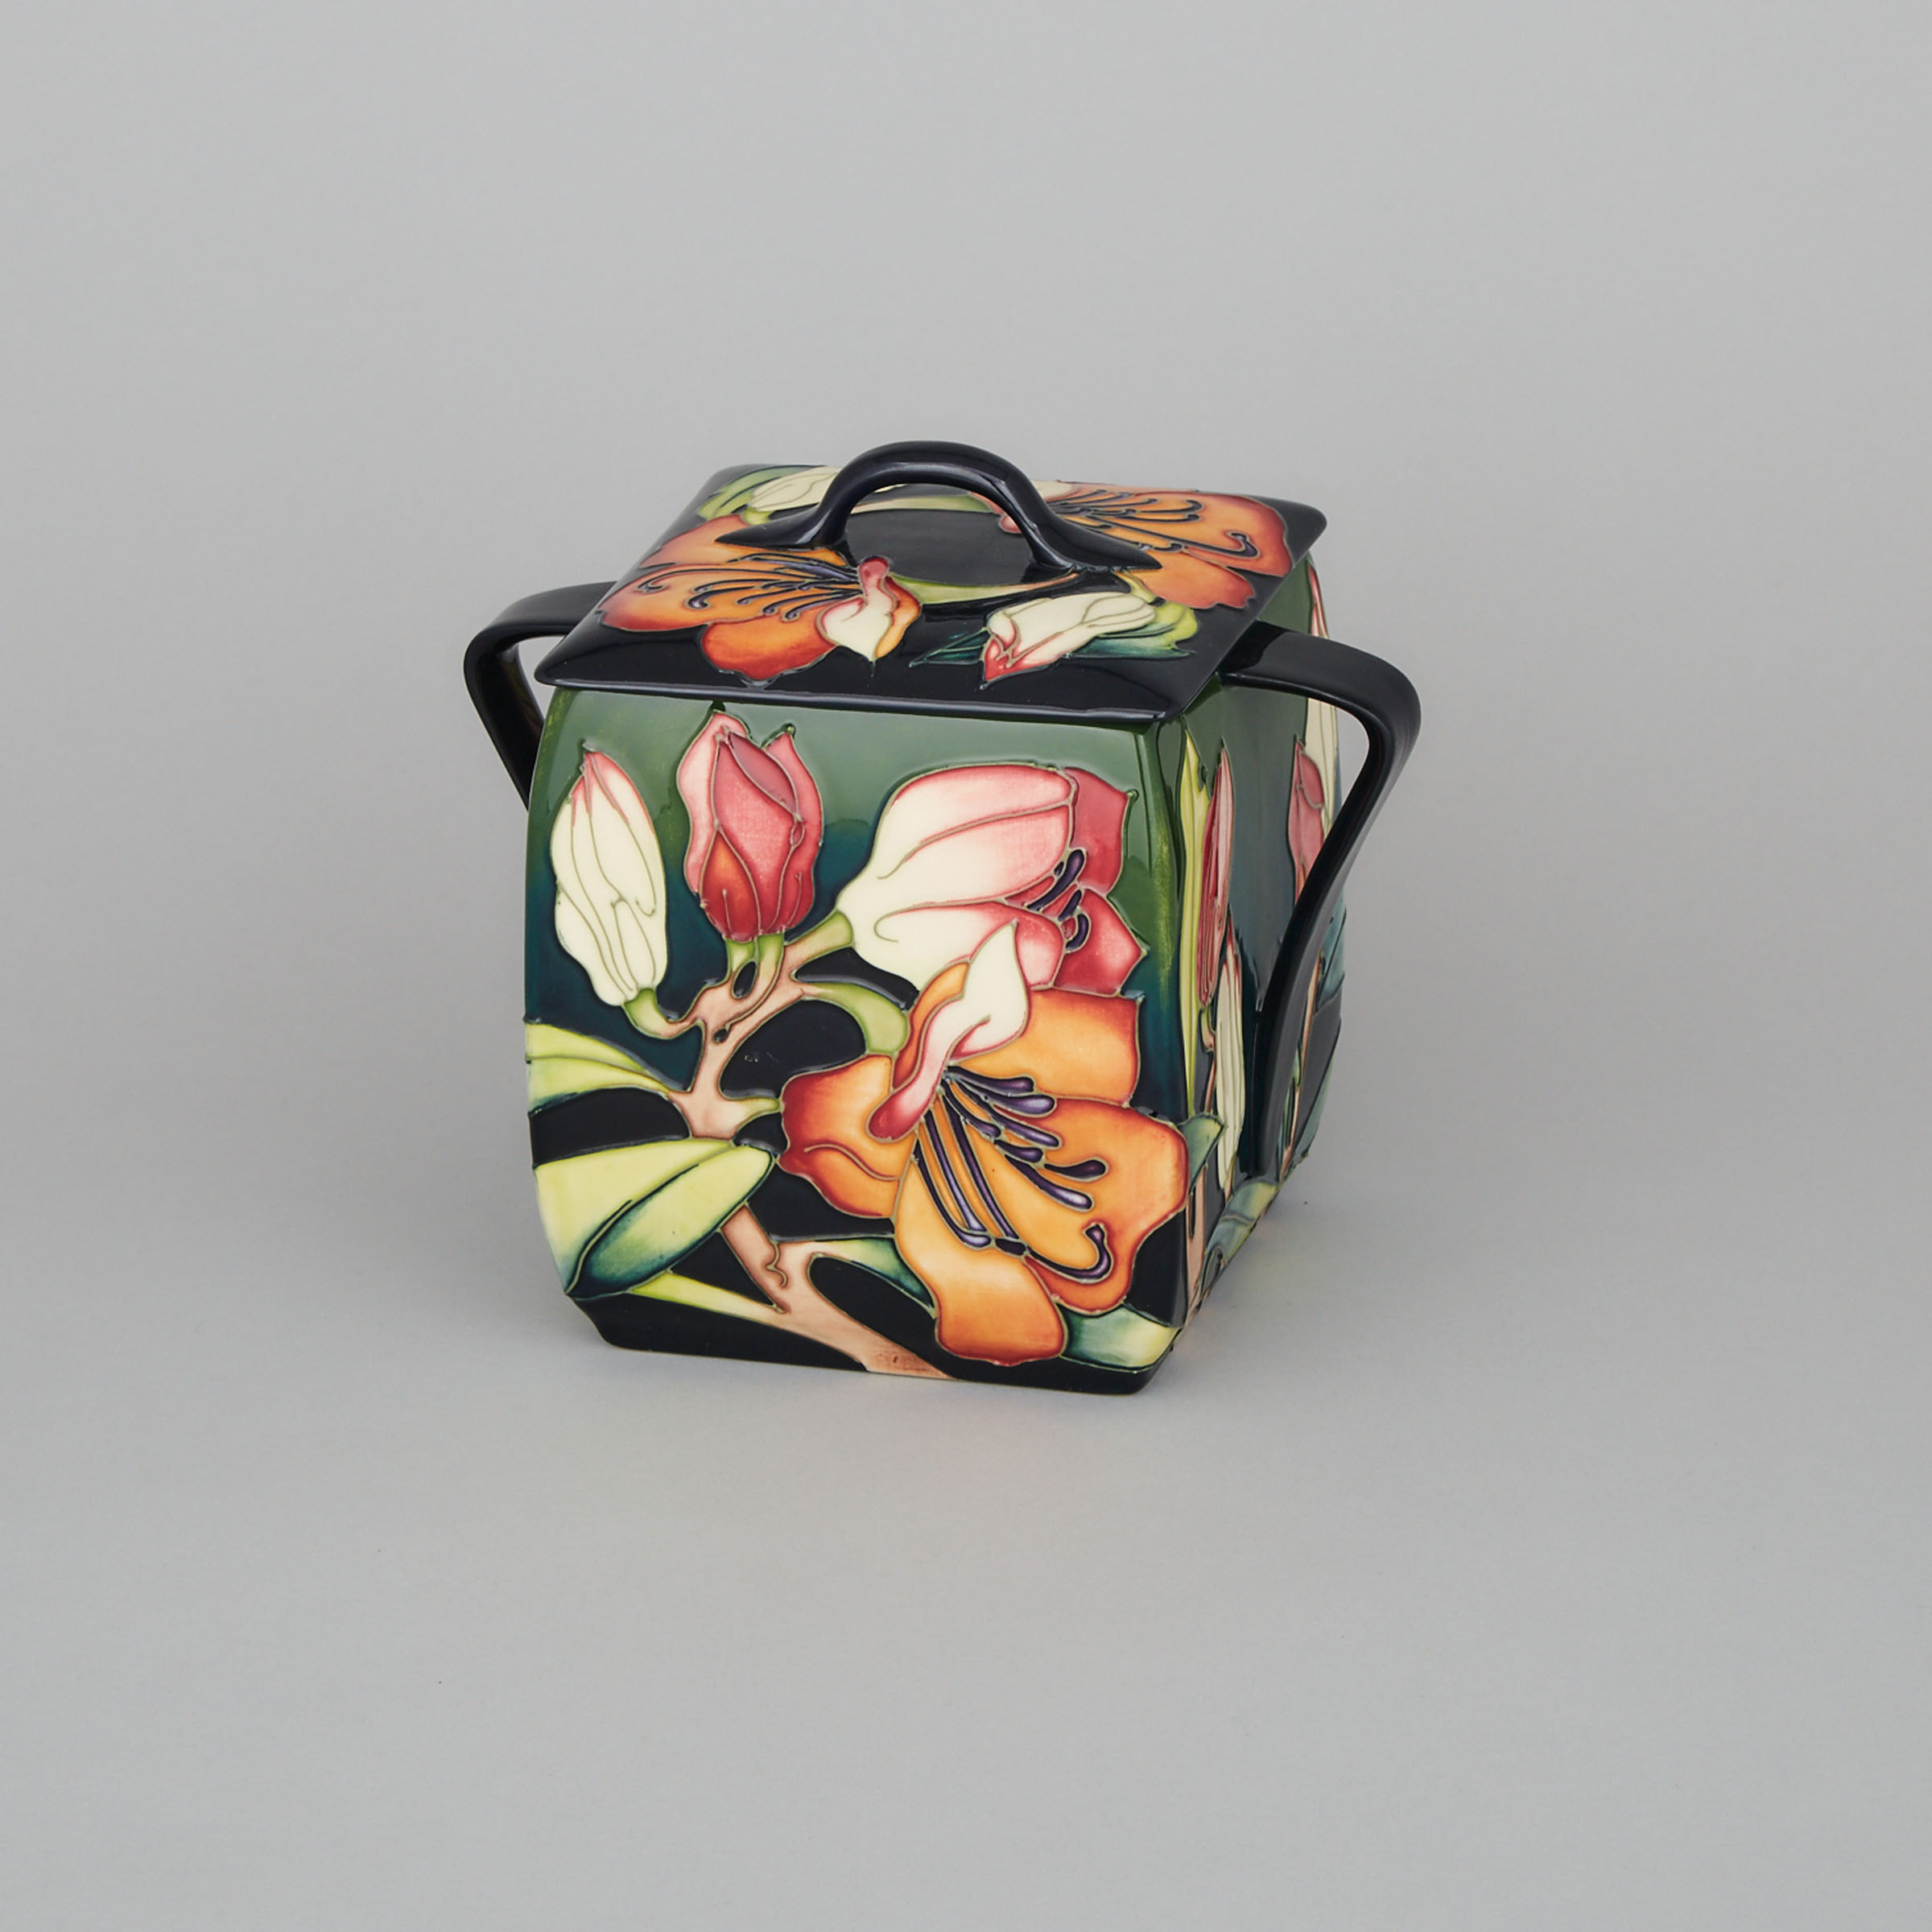 Moorcroft Pencarrow Covered Biscuit Box, Emma Bossons, 2005